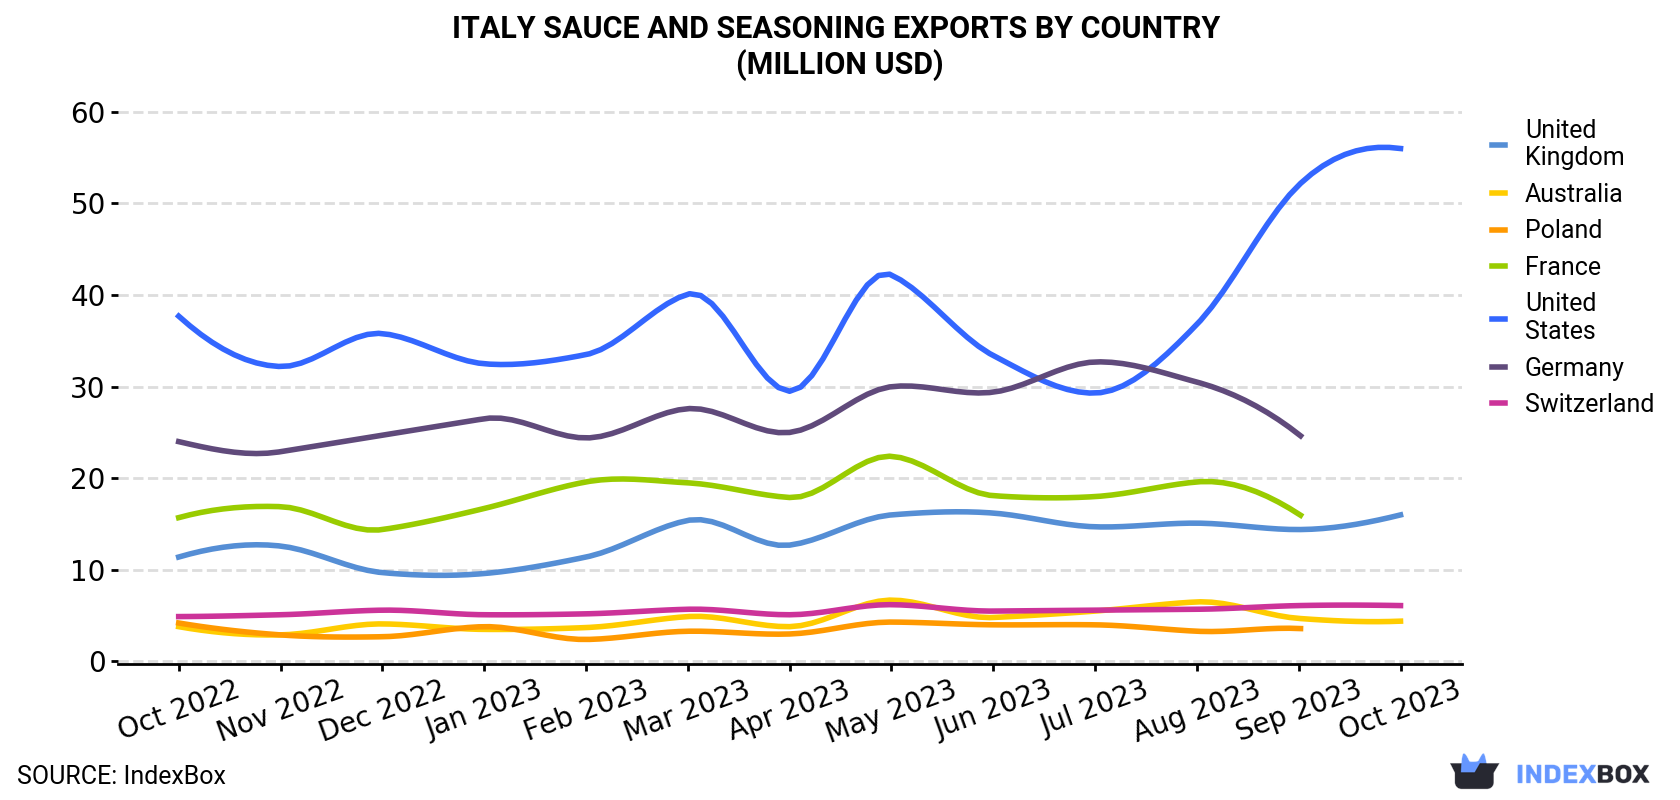 Italy Sauce and Seasoning Exports By Country (Million USD)